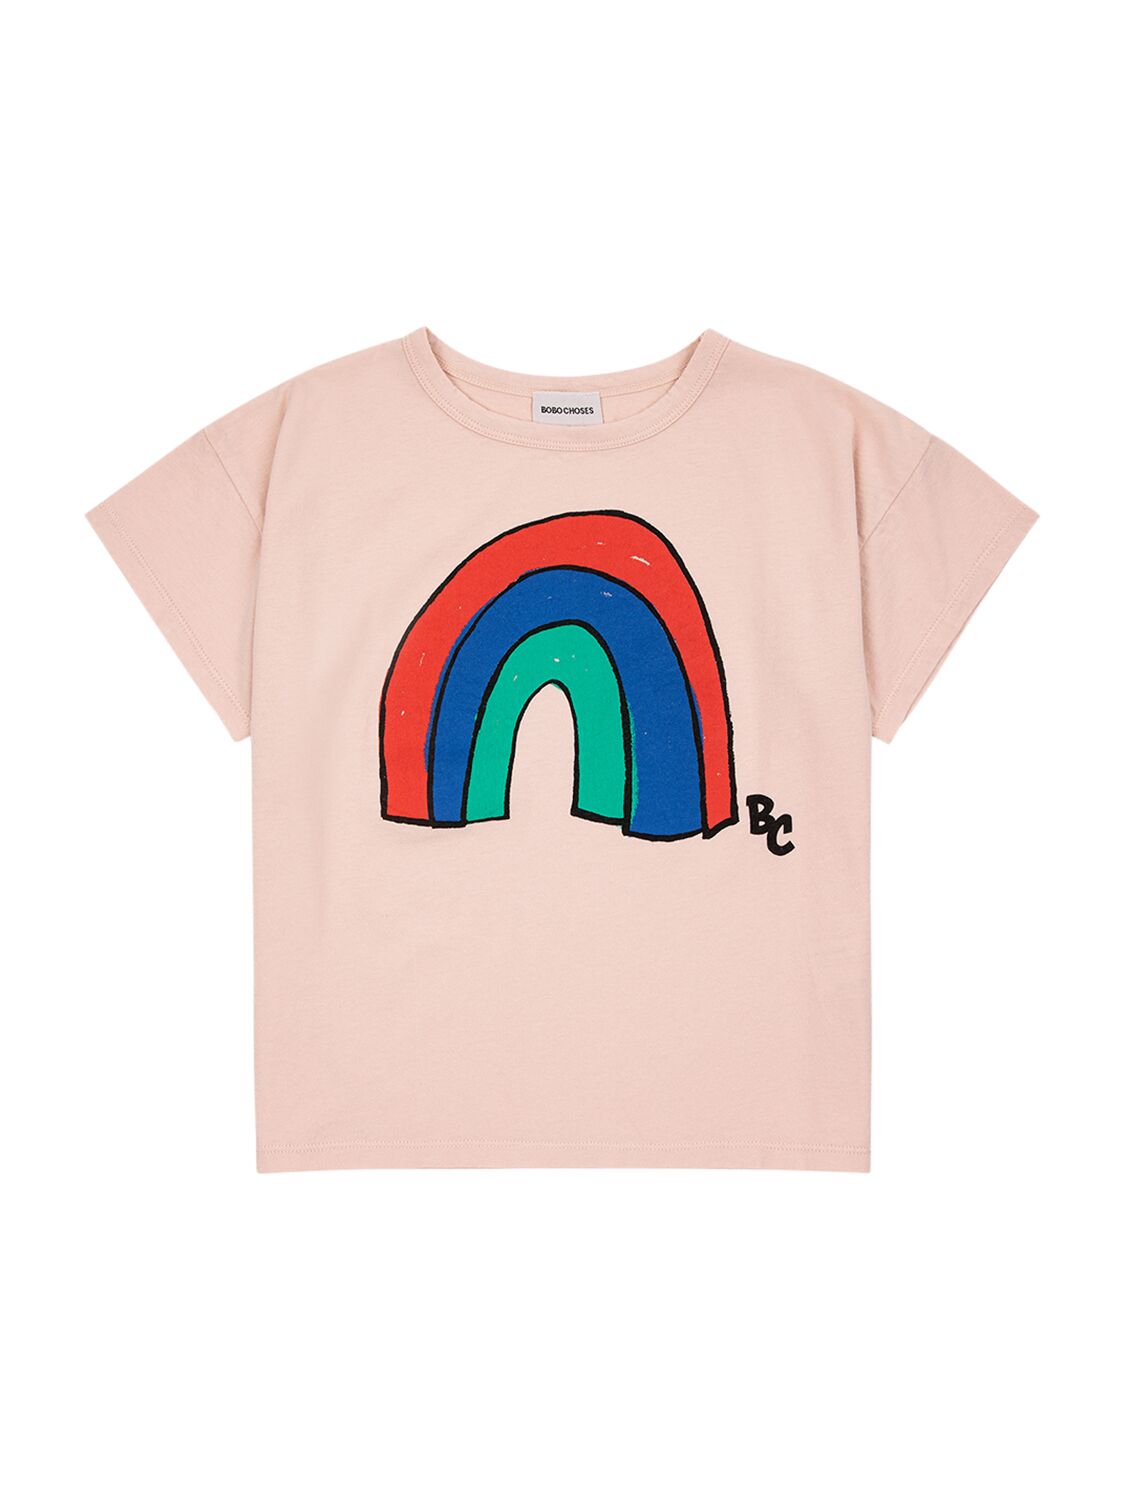 Shop Bobo Choses Printed Cotton T-shirt In Light Pink